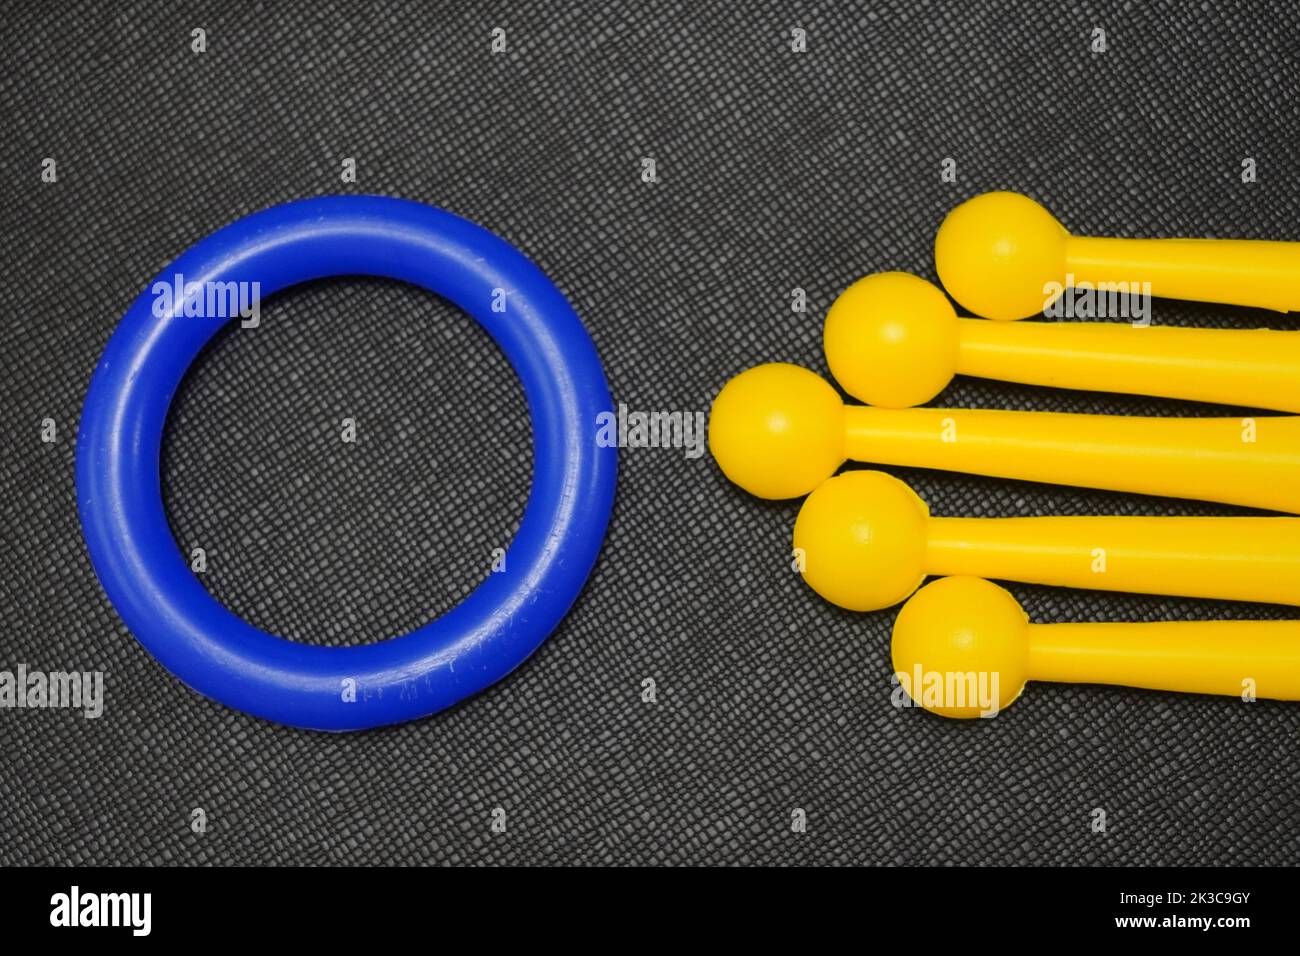 Concept with yellow and blue toy sticks and rings in front of black background. Colorful plastic ring and sticks. Yellow and blue. Stock Photo